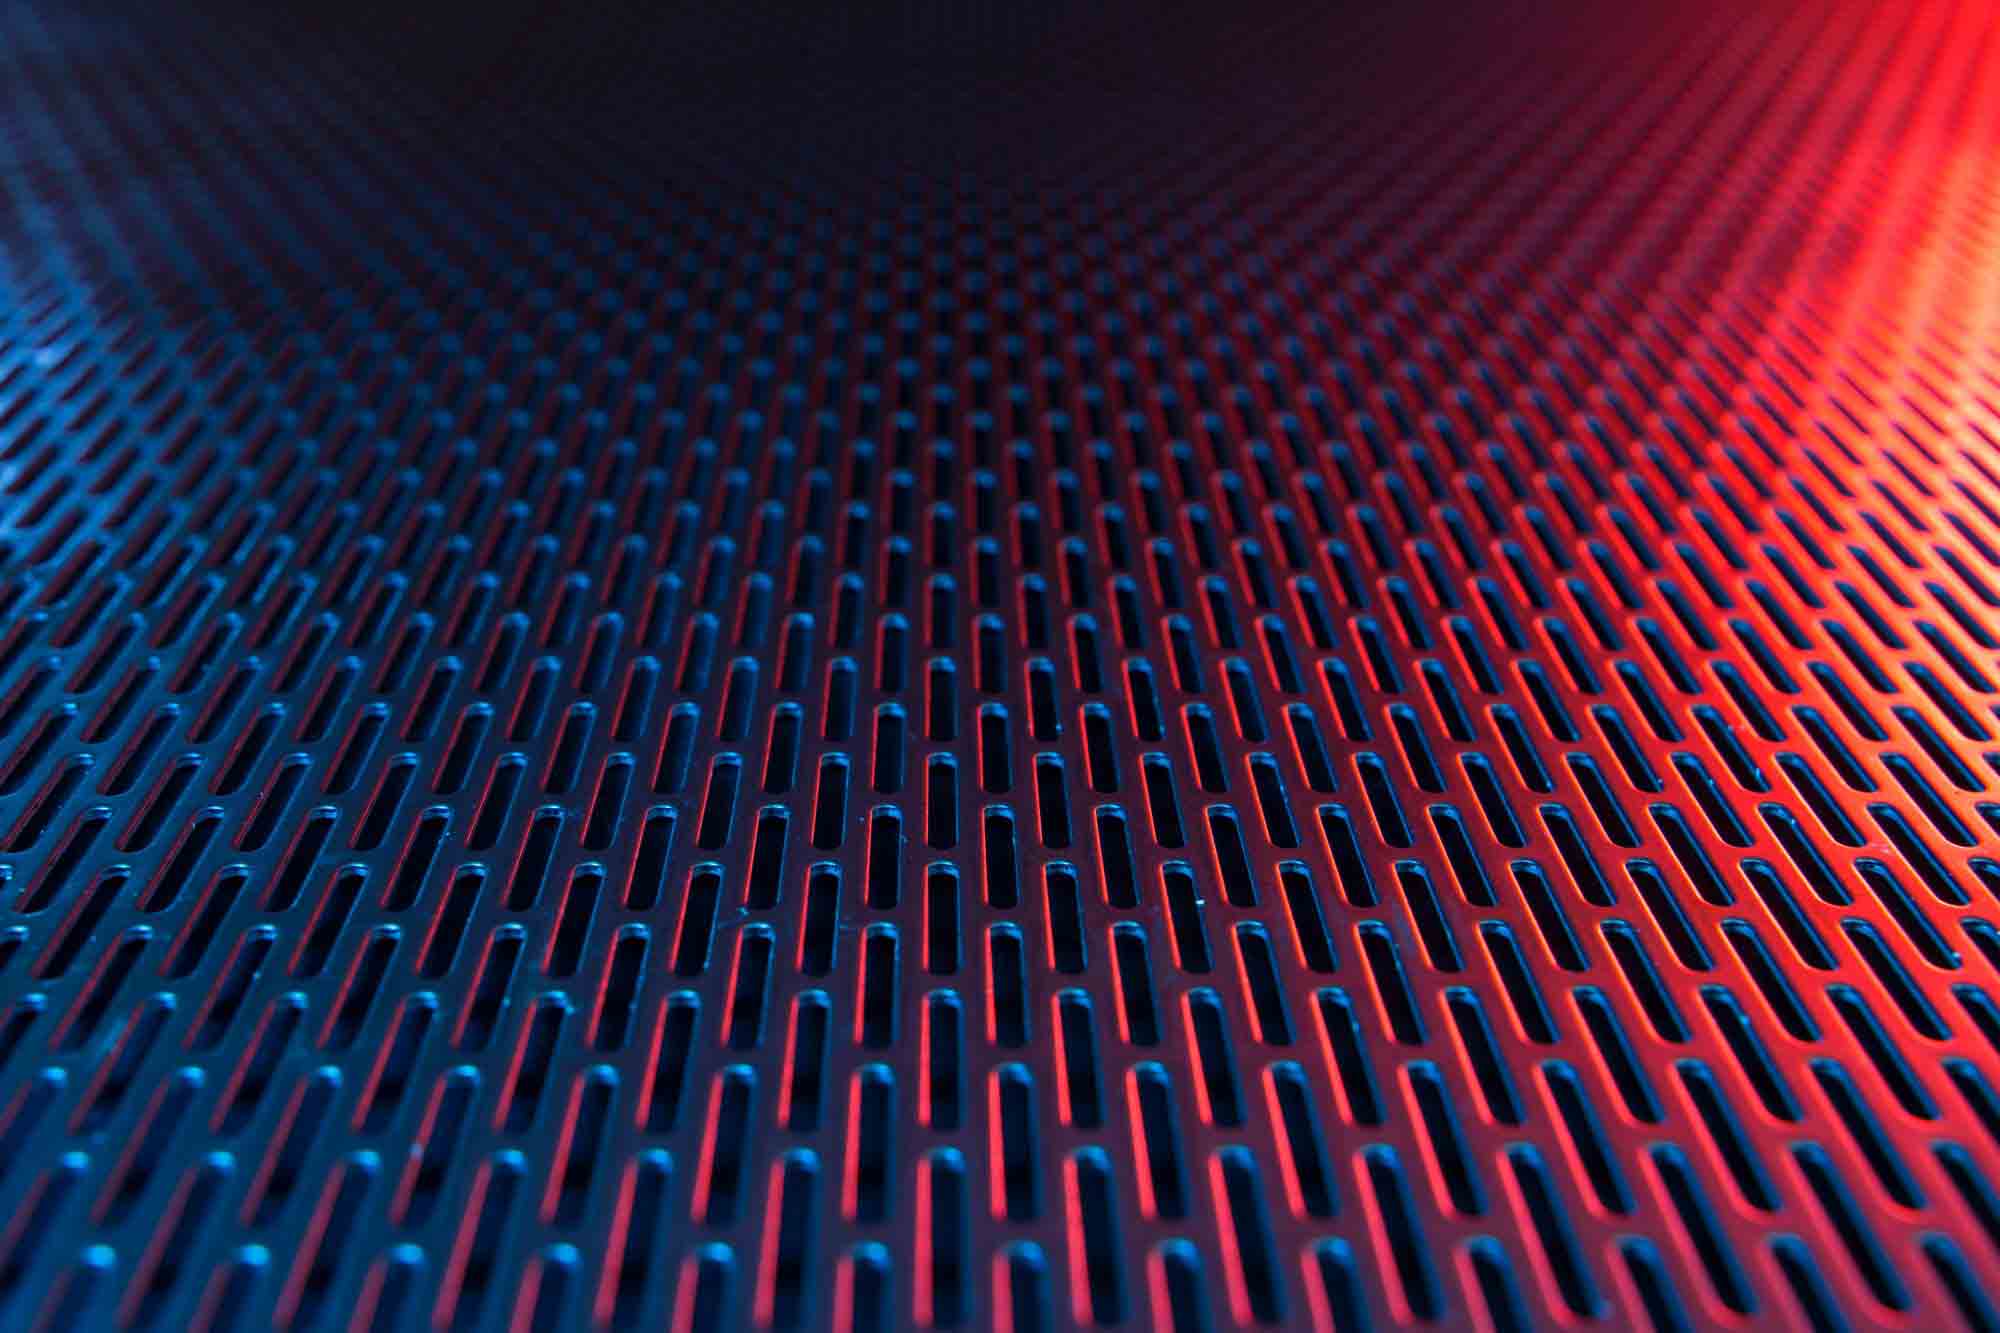 A close-up image of Stainless Steel Slotted Hole Perforated Metal with a red light shining on the right half.